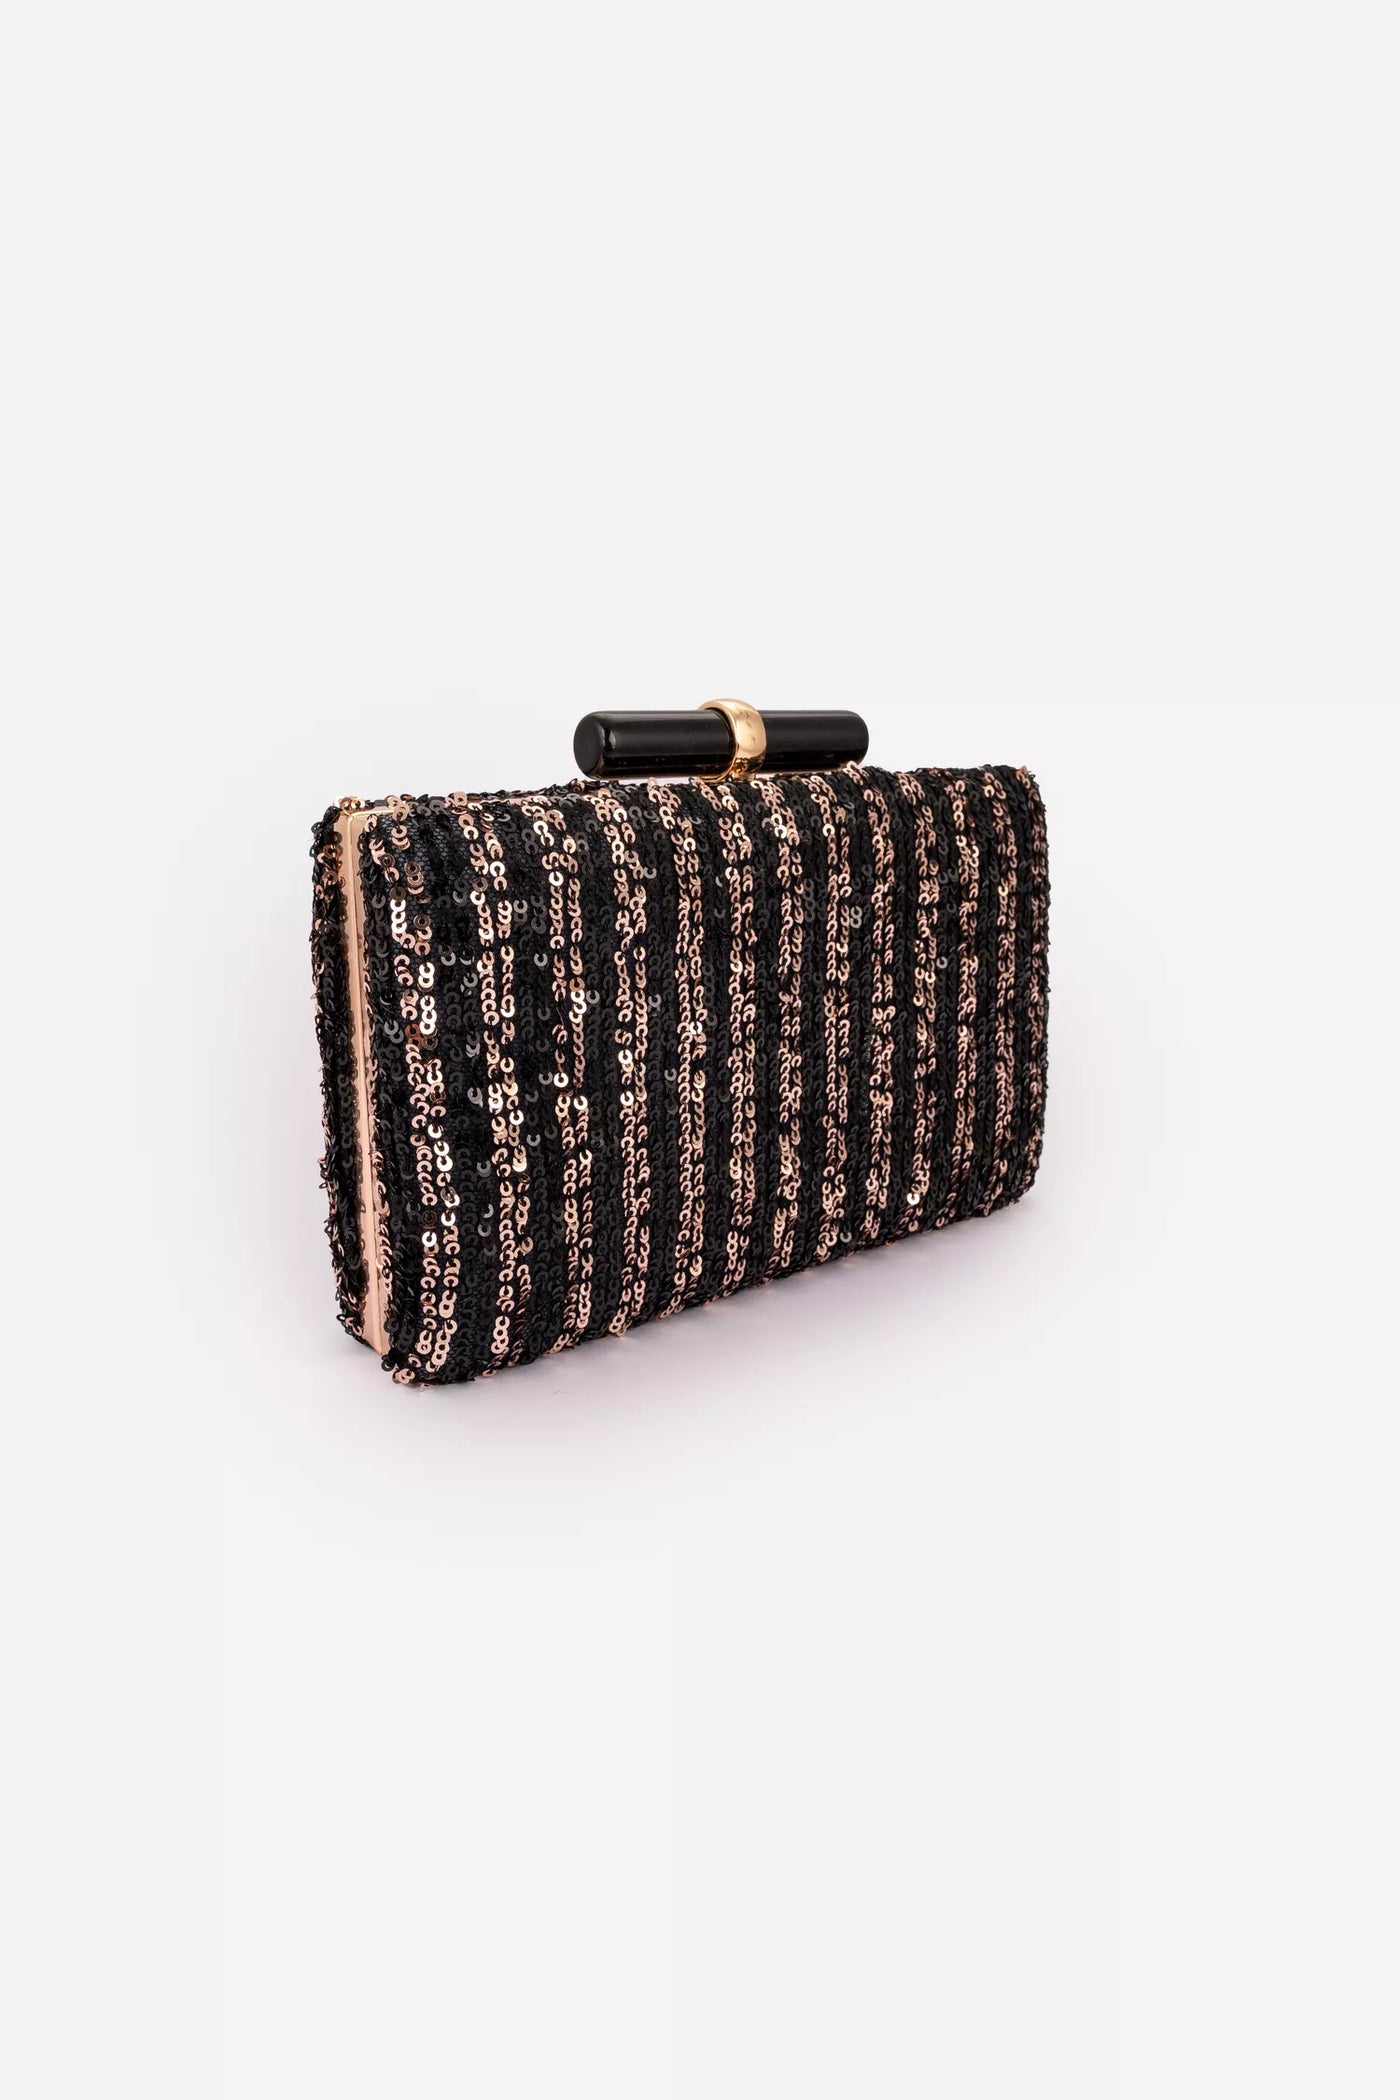 Light Gold And Black Clutch